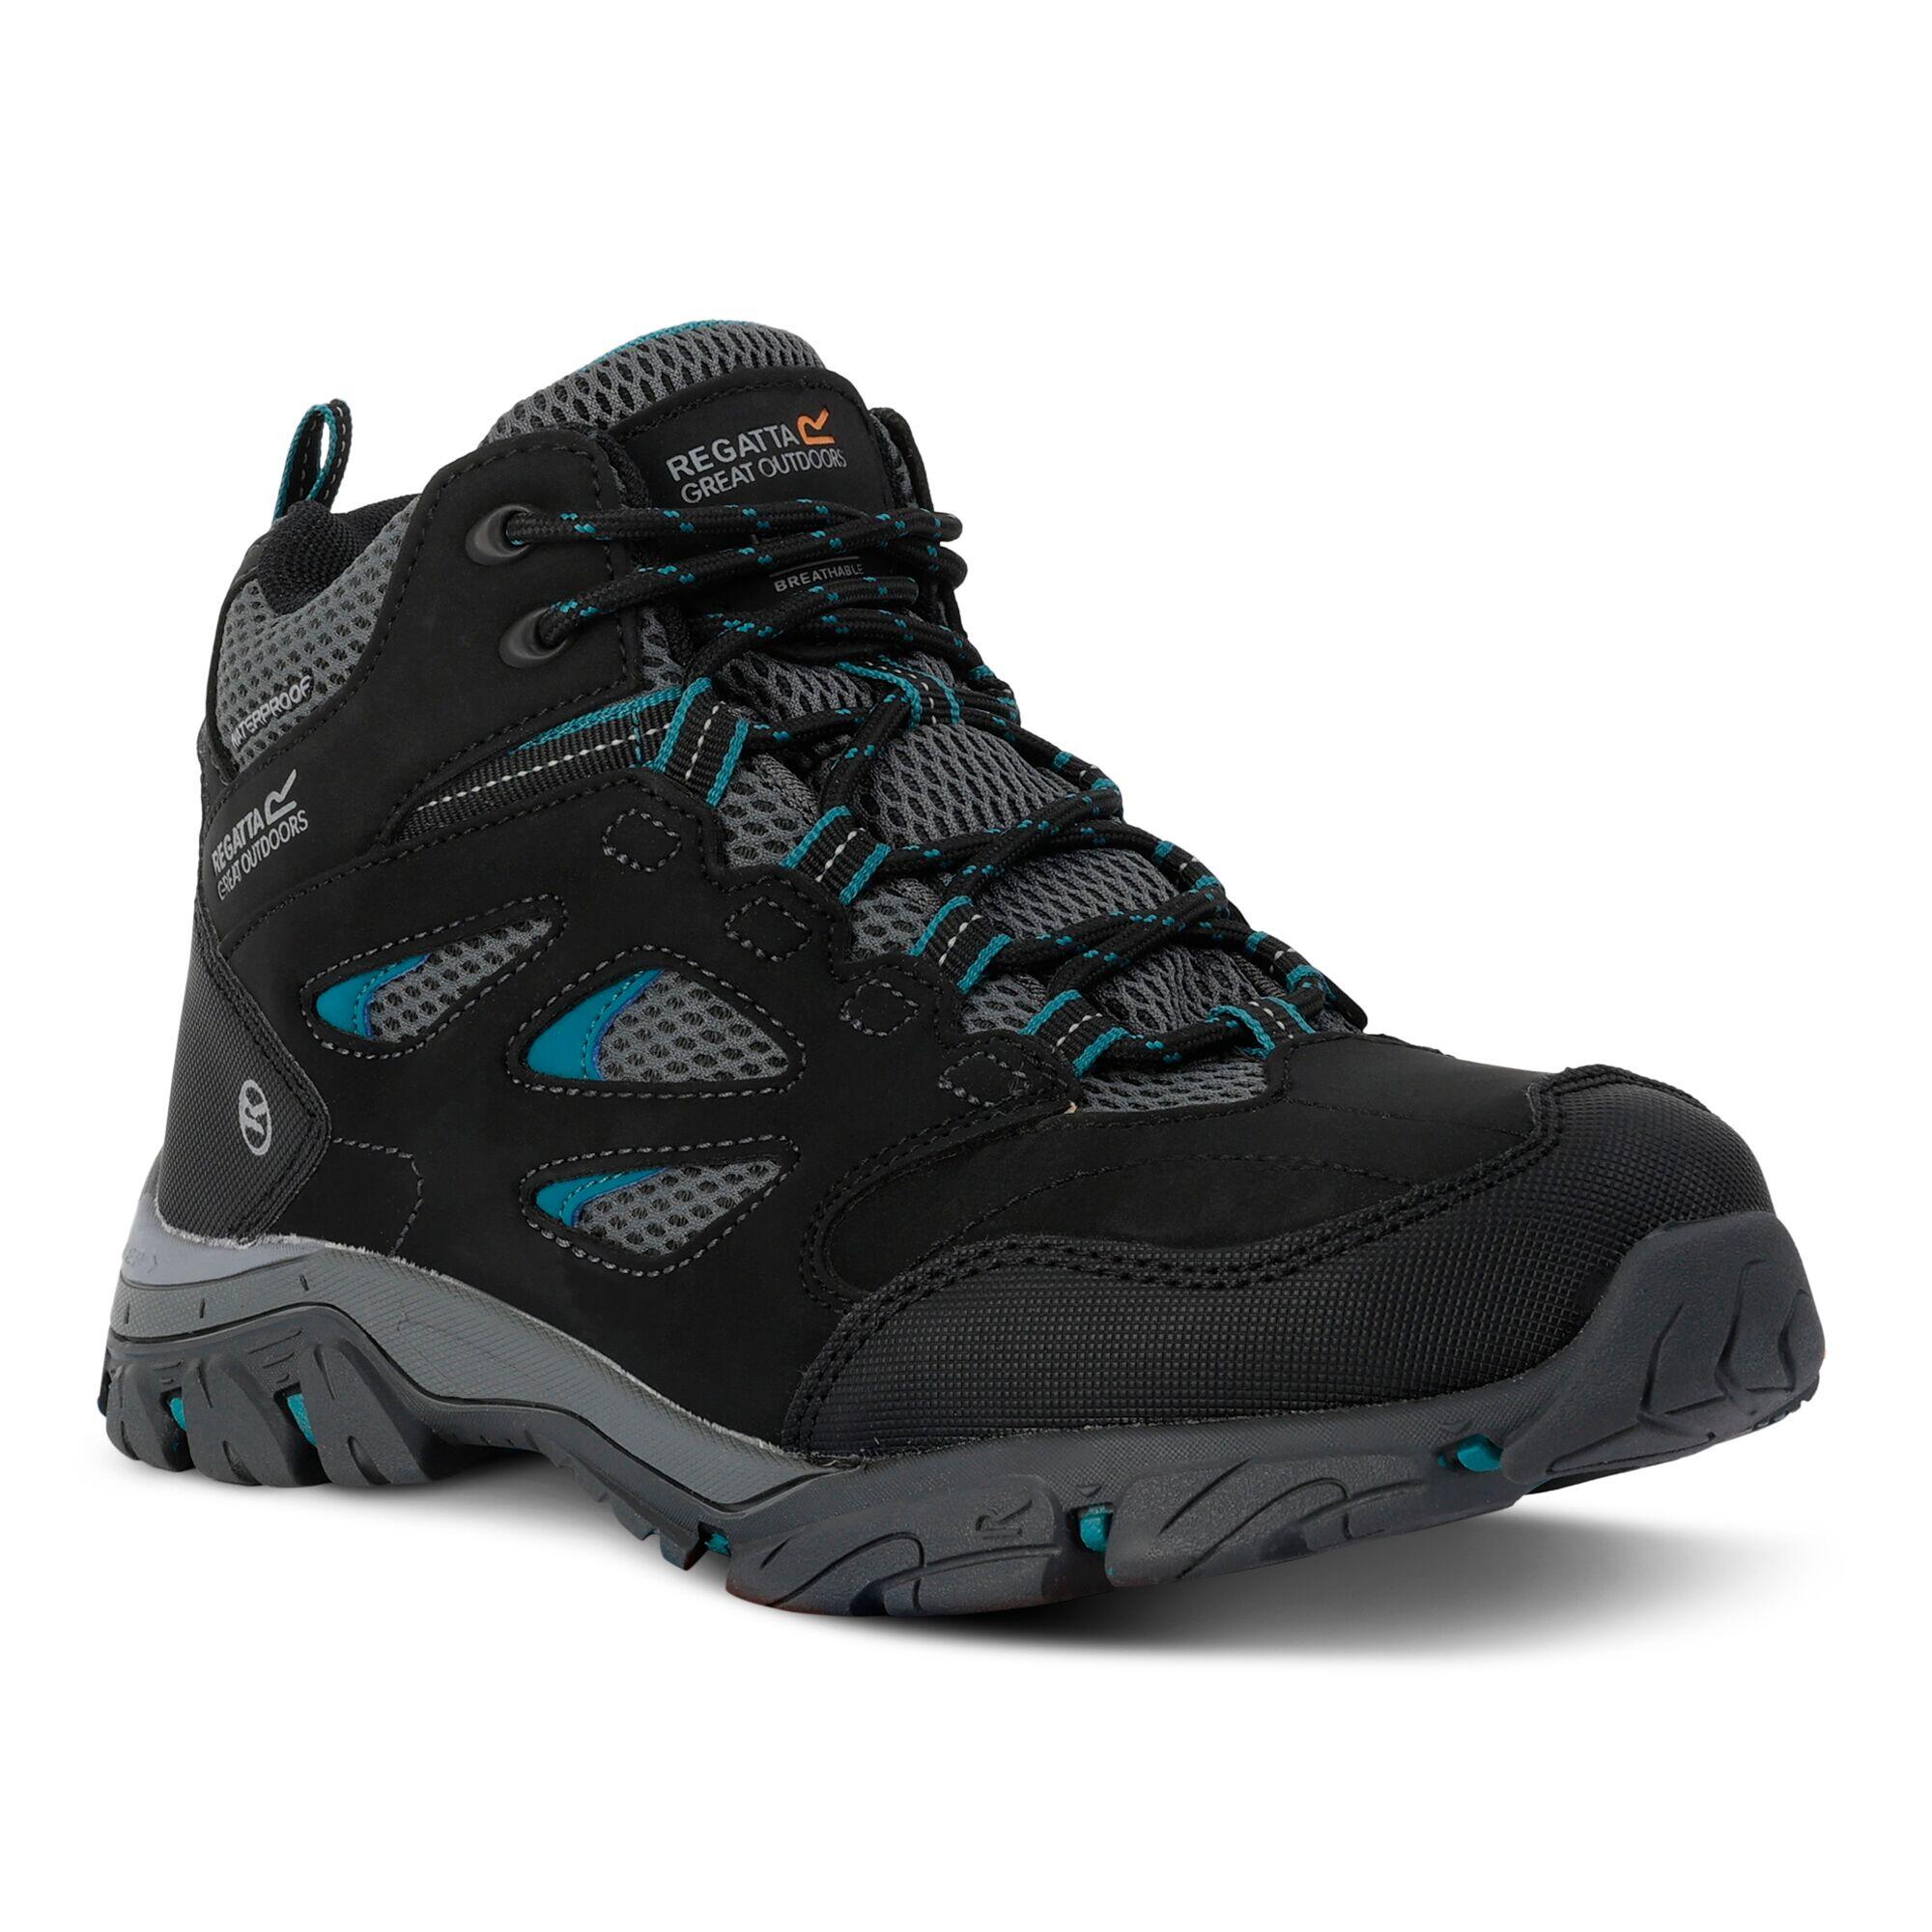 Lady Holcombe IEP Mid Women's Hiking Boots - Black / Blue 4/5